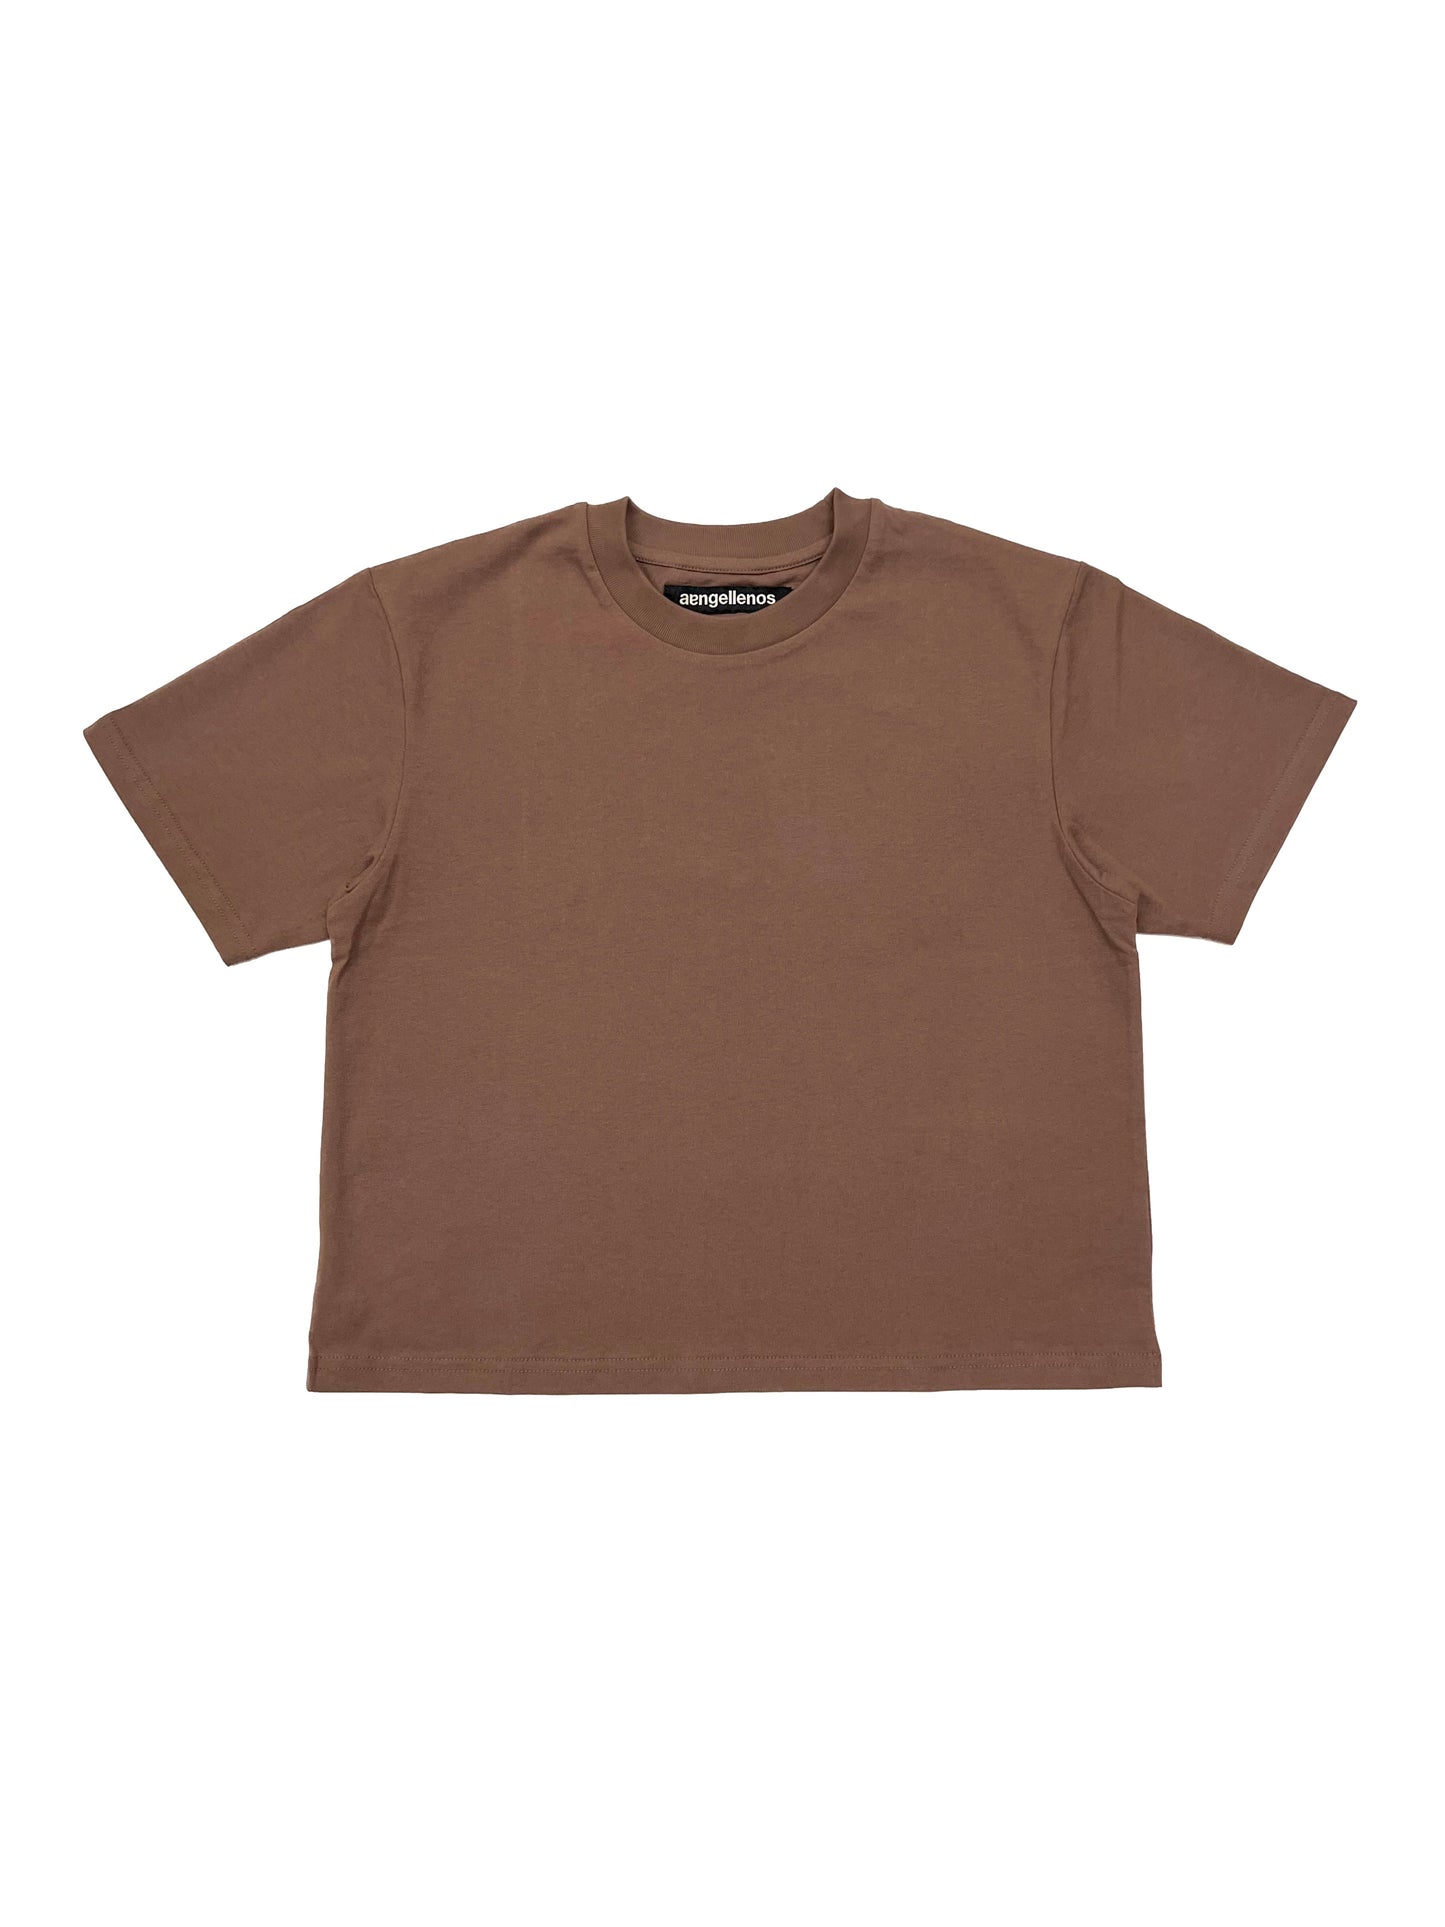 brown cropped tee 2.0